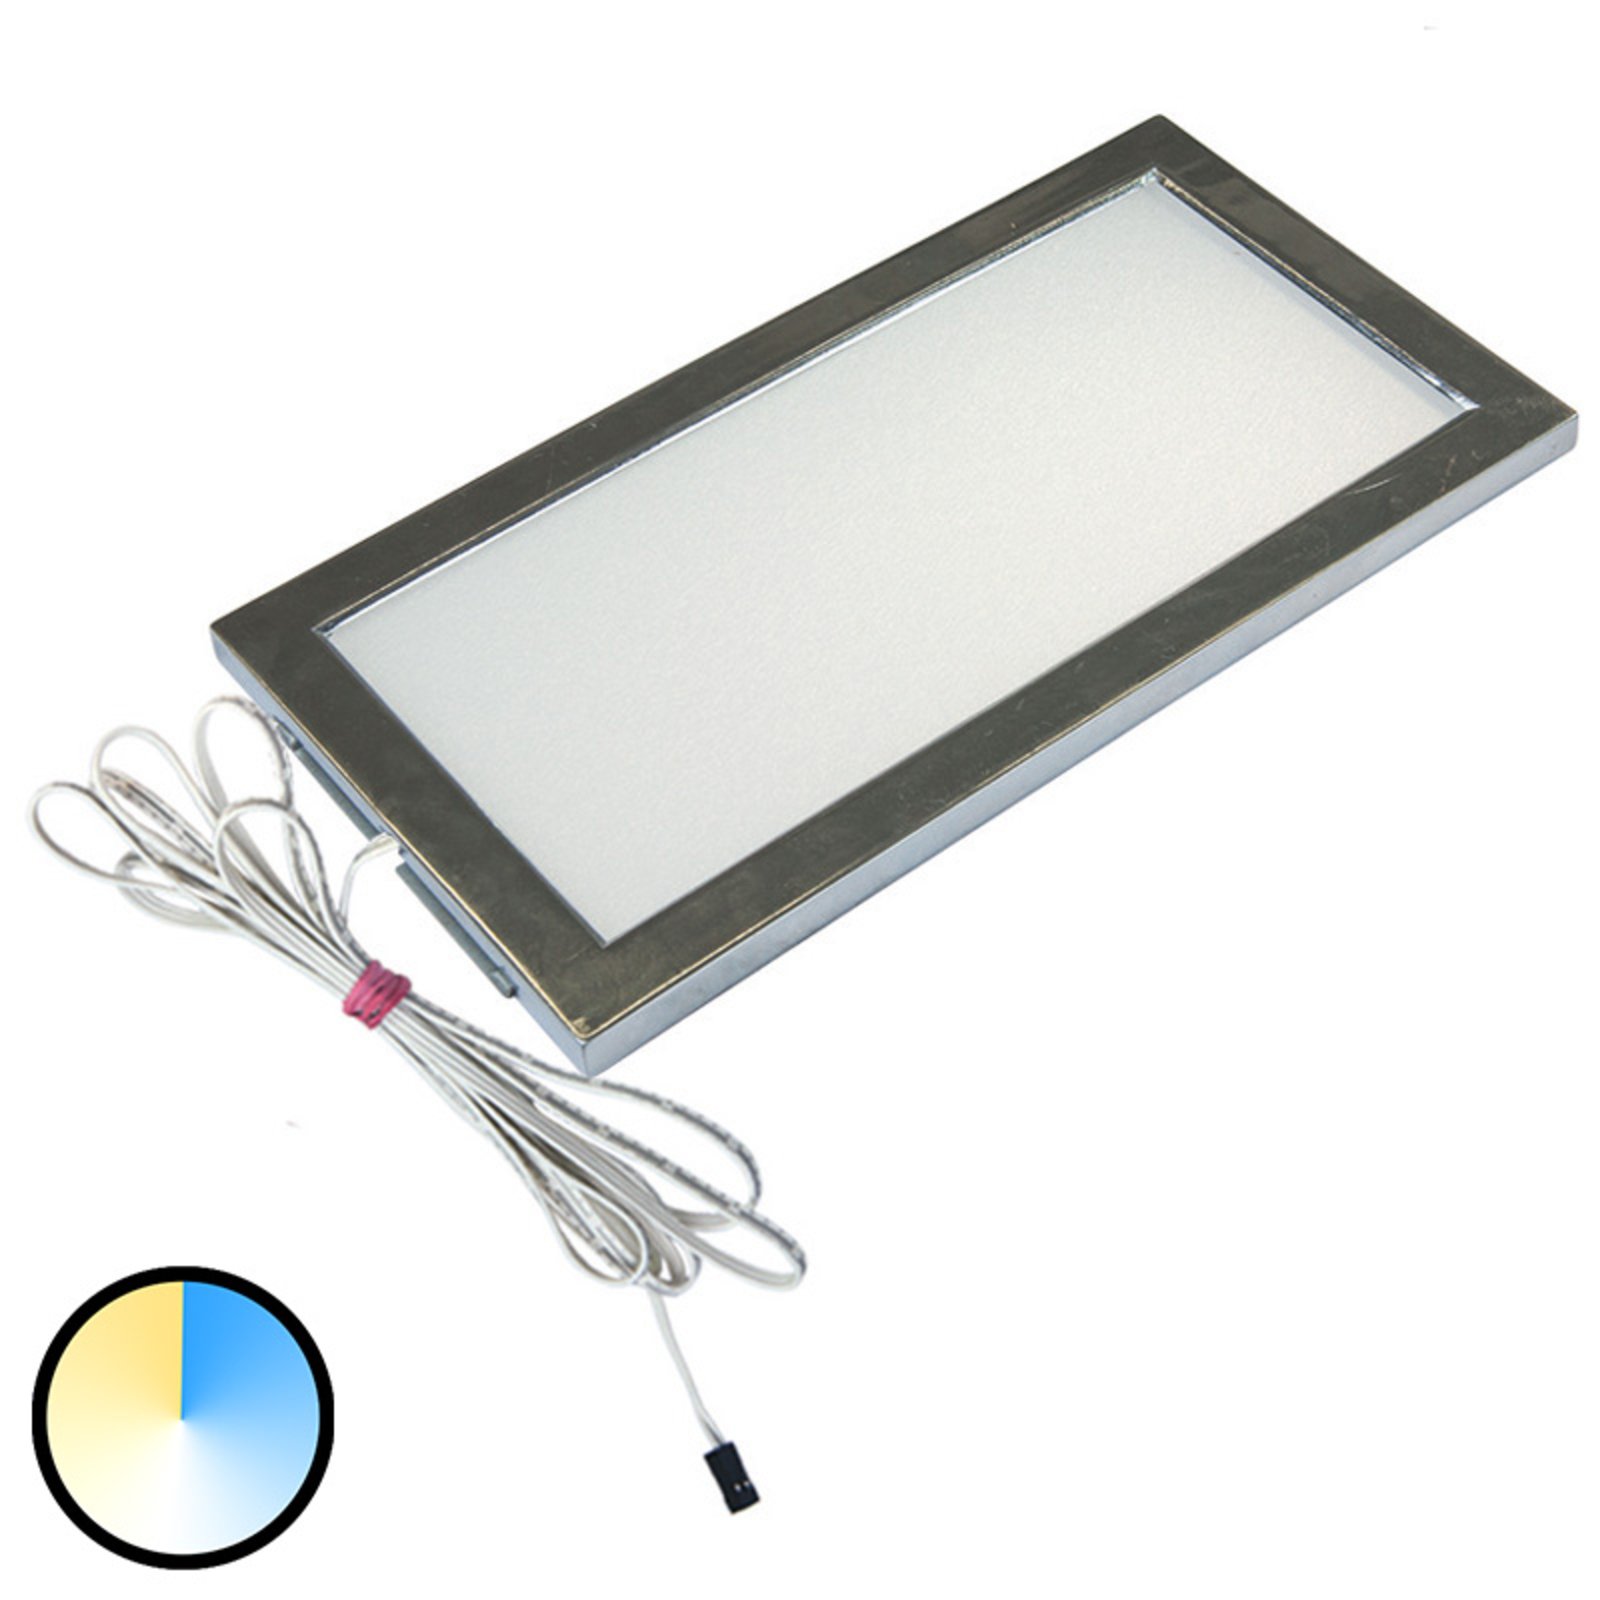 Dynamic LED Sky under-cabinet lamp stainless steel